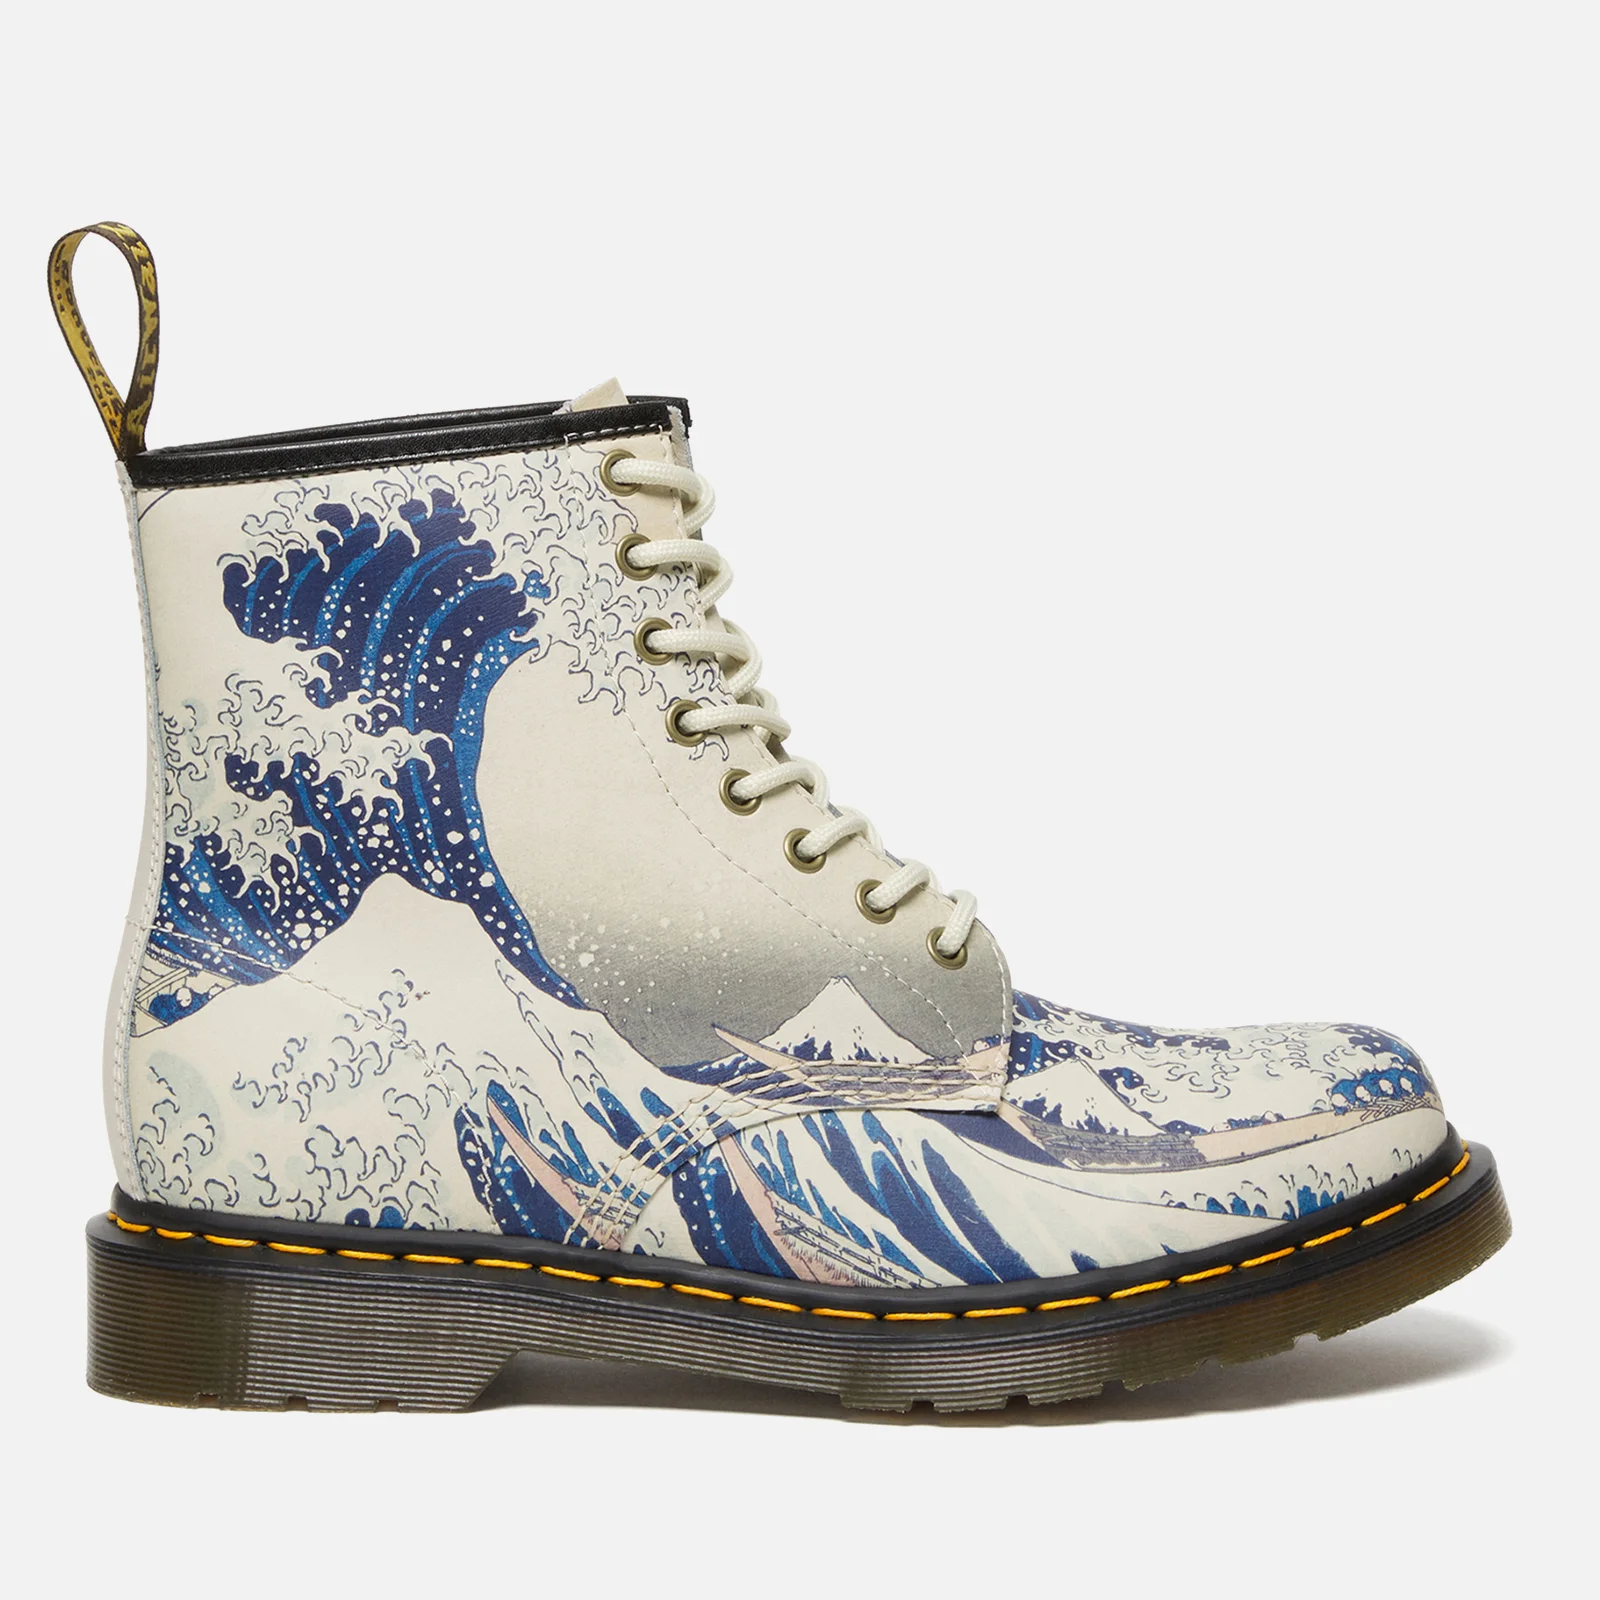 Dr. Martens 1460 X The Met Masterpiece Leather Boots Image 1